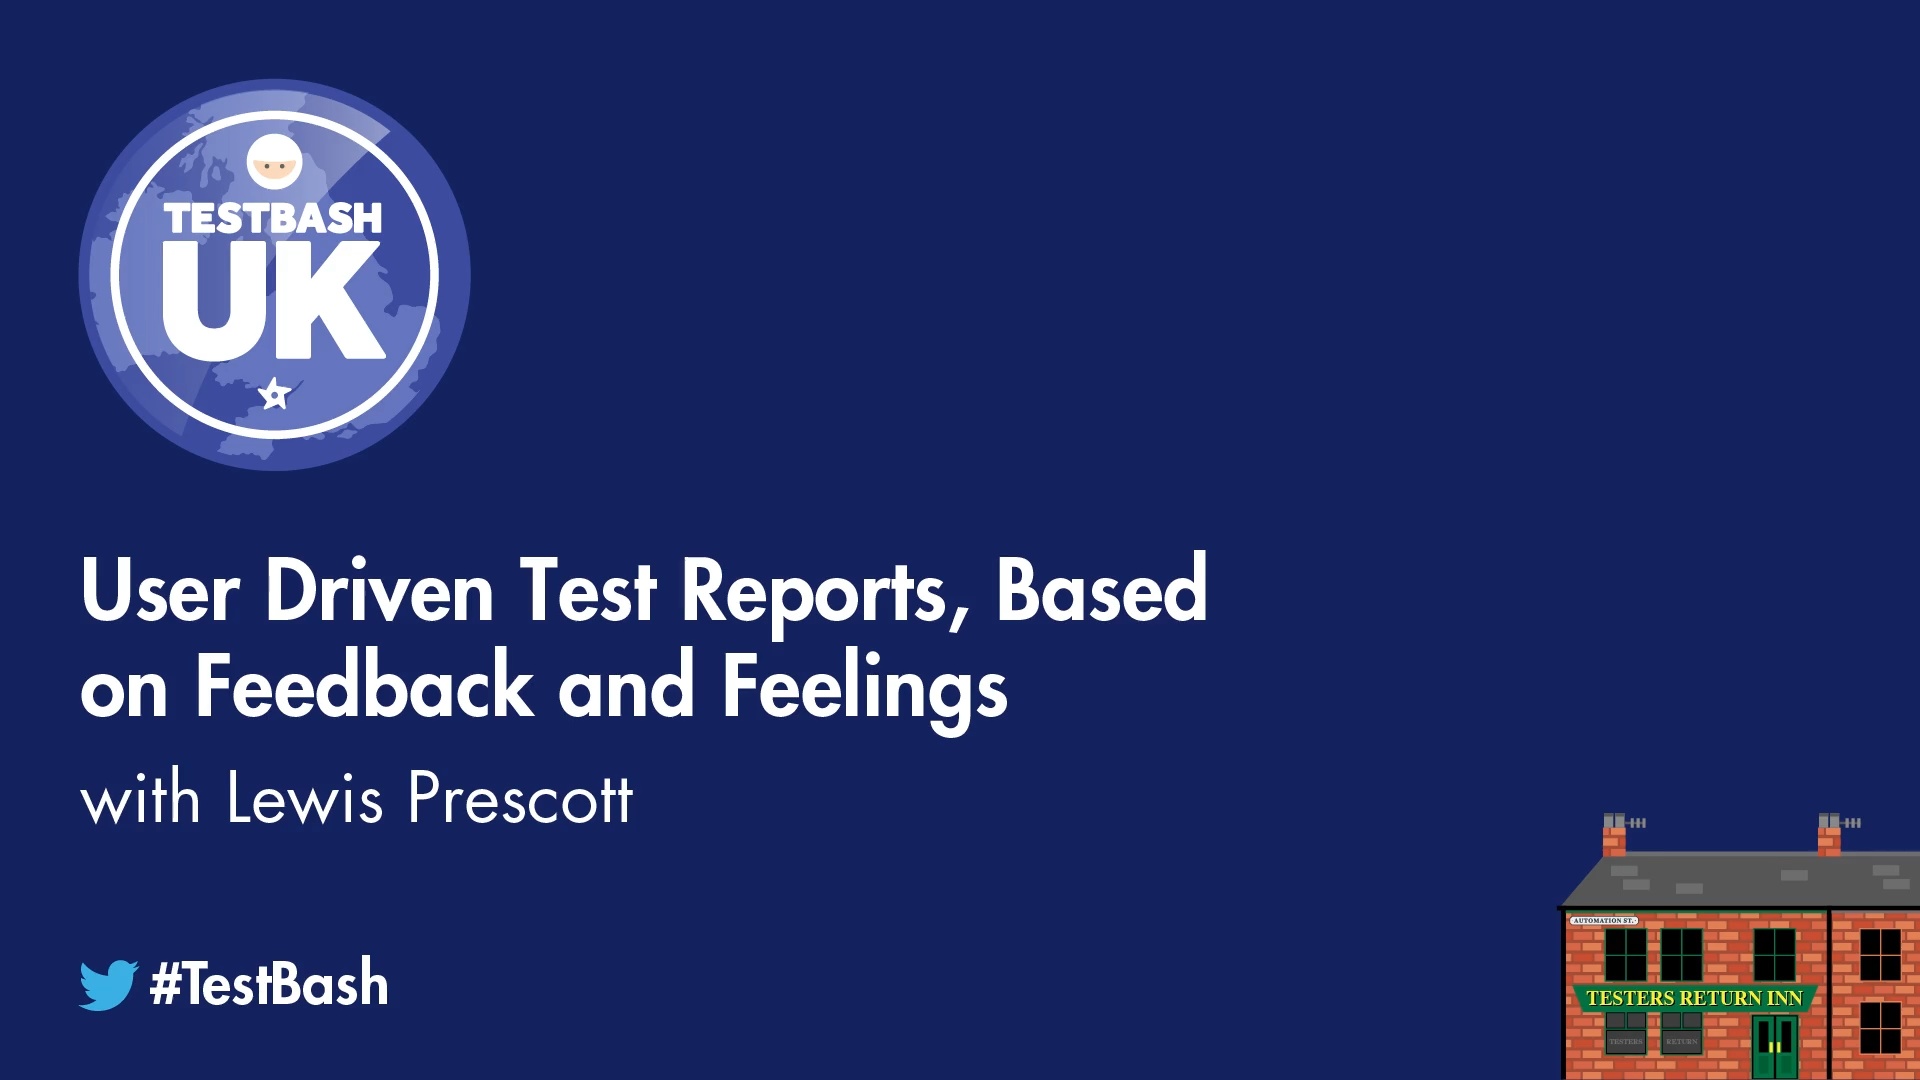 User Driven Test Reports, Based on Feedback and Feelings